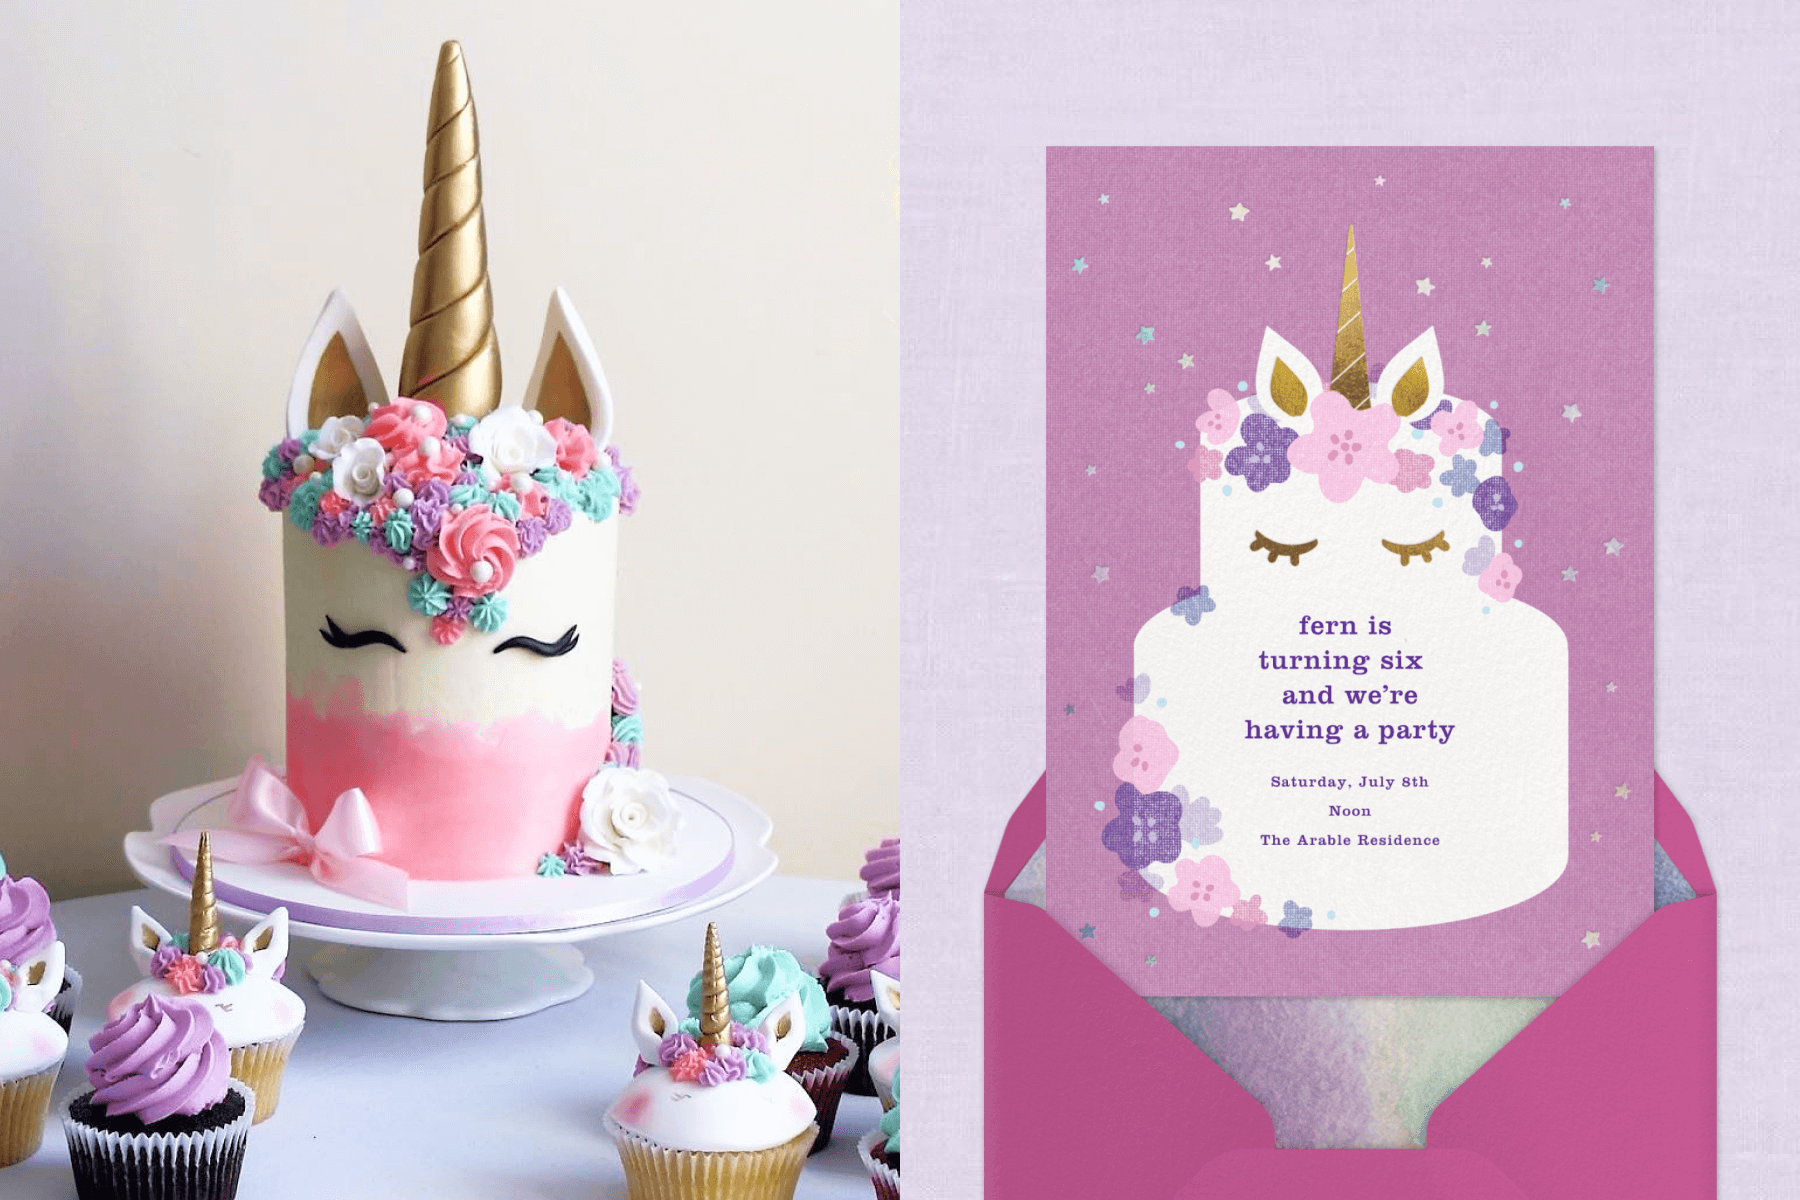 A cake with a gold unicorn horn and ears with similar cupcakes; a purple invitation with a white unicorn layer cake.